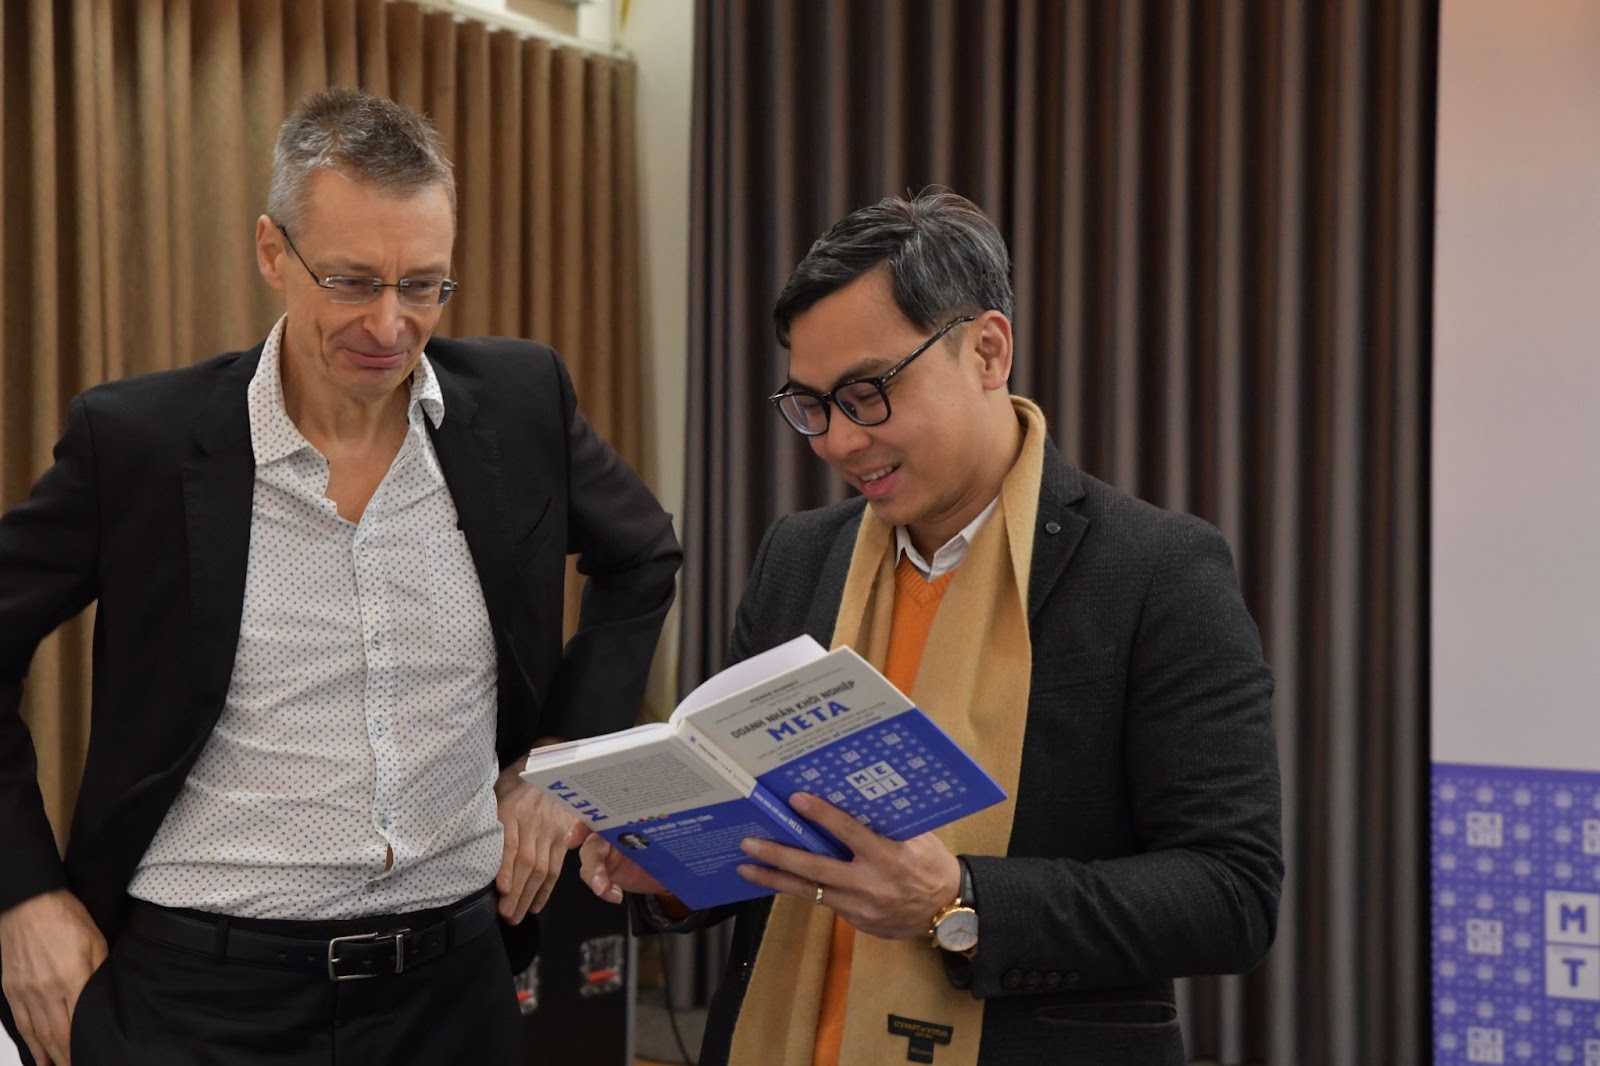 Director of IFI Phùng Danh Thắng checking the book with author Pierre Bonnet